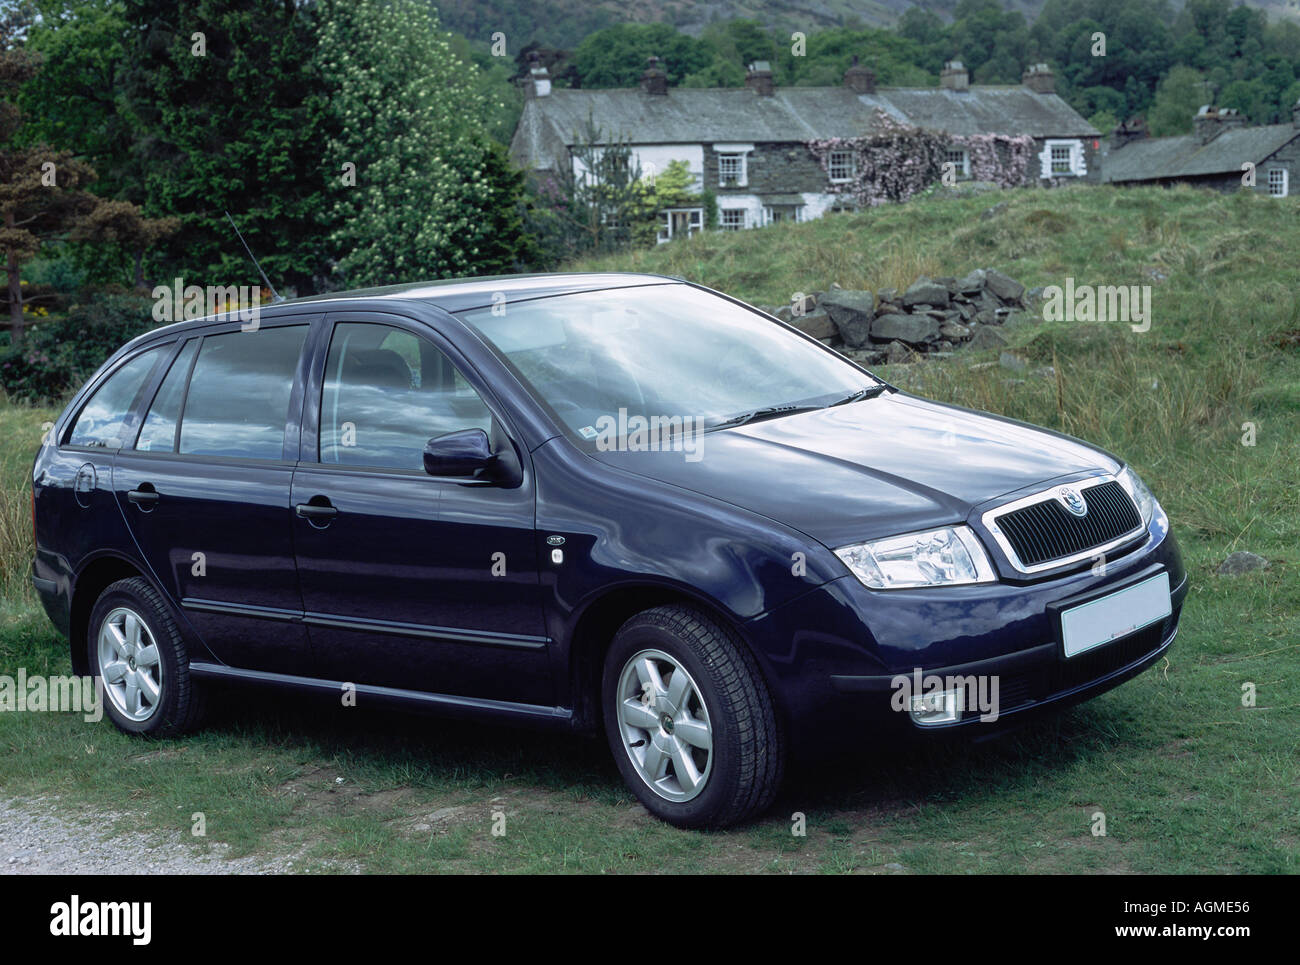 Skoda Fabia Parked on Grass in Front Of Cottages Stock Photo